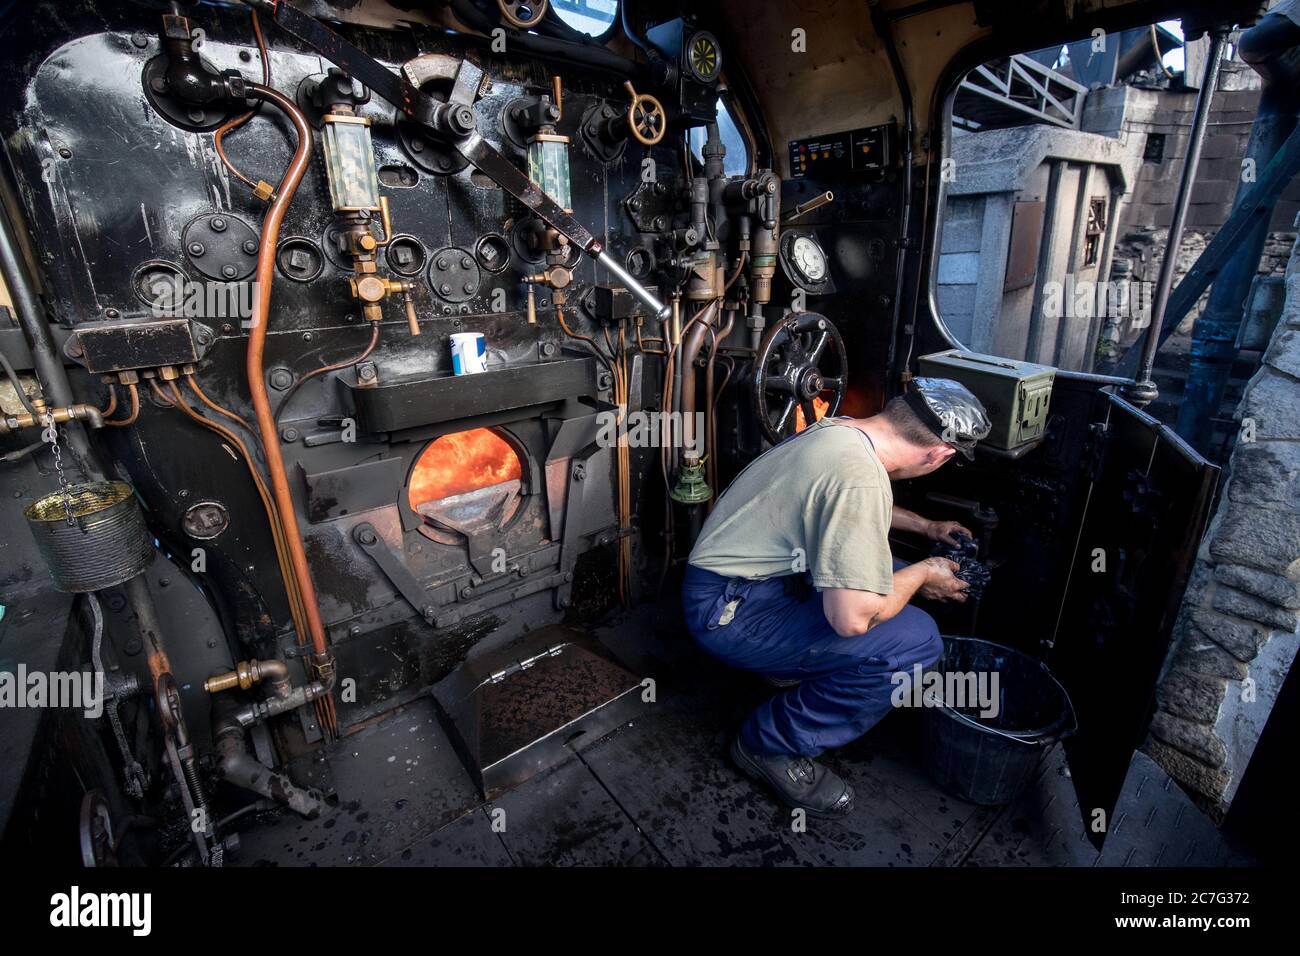 Fireman Alexander Atkins cleans the cab of the SR U Class steam locomotive No. 31806, as final preparations are made at the Swanage Railway ahead of the running of steam trains for the first time since the coronavirus lockdown in March. The heritage railway on the Isle of Purbeck, Dorset, will use steam engines again on Saturday with a non-stop service between Swanage and Norden stations with social distancing in place at stations and on trains and the wearing of face coverings. Stock Photo